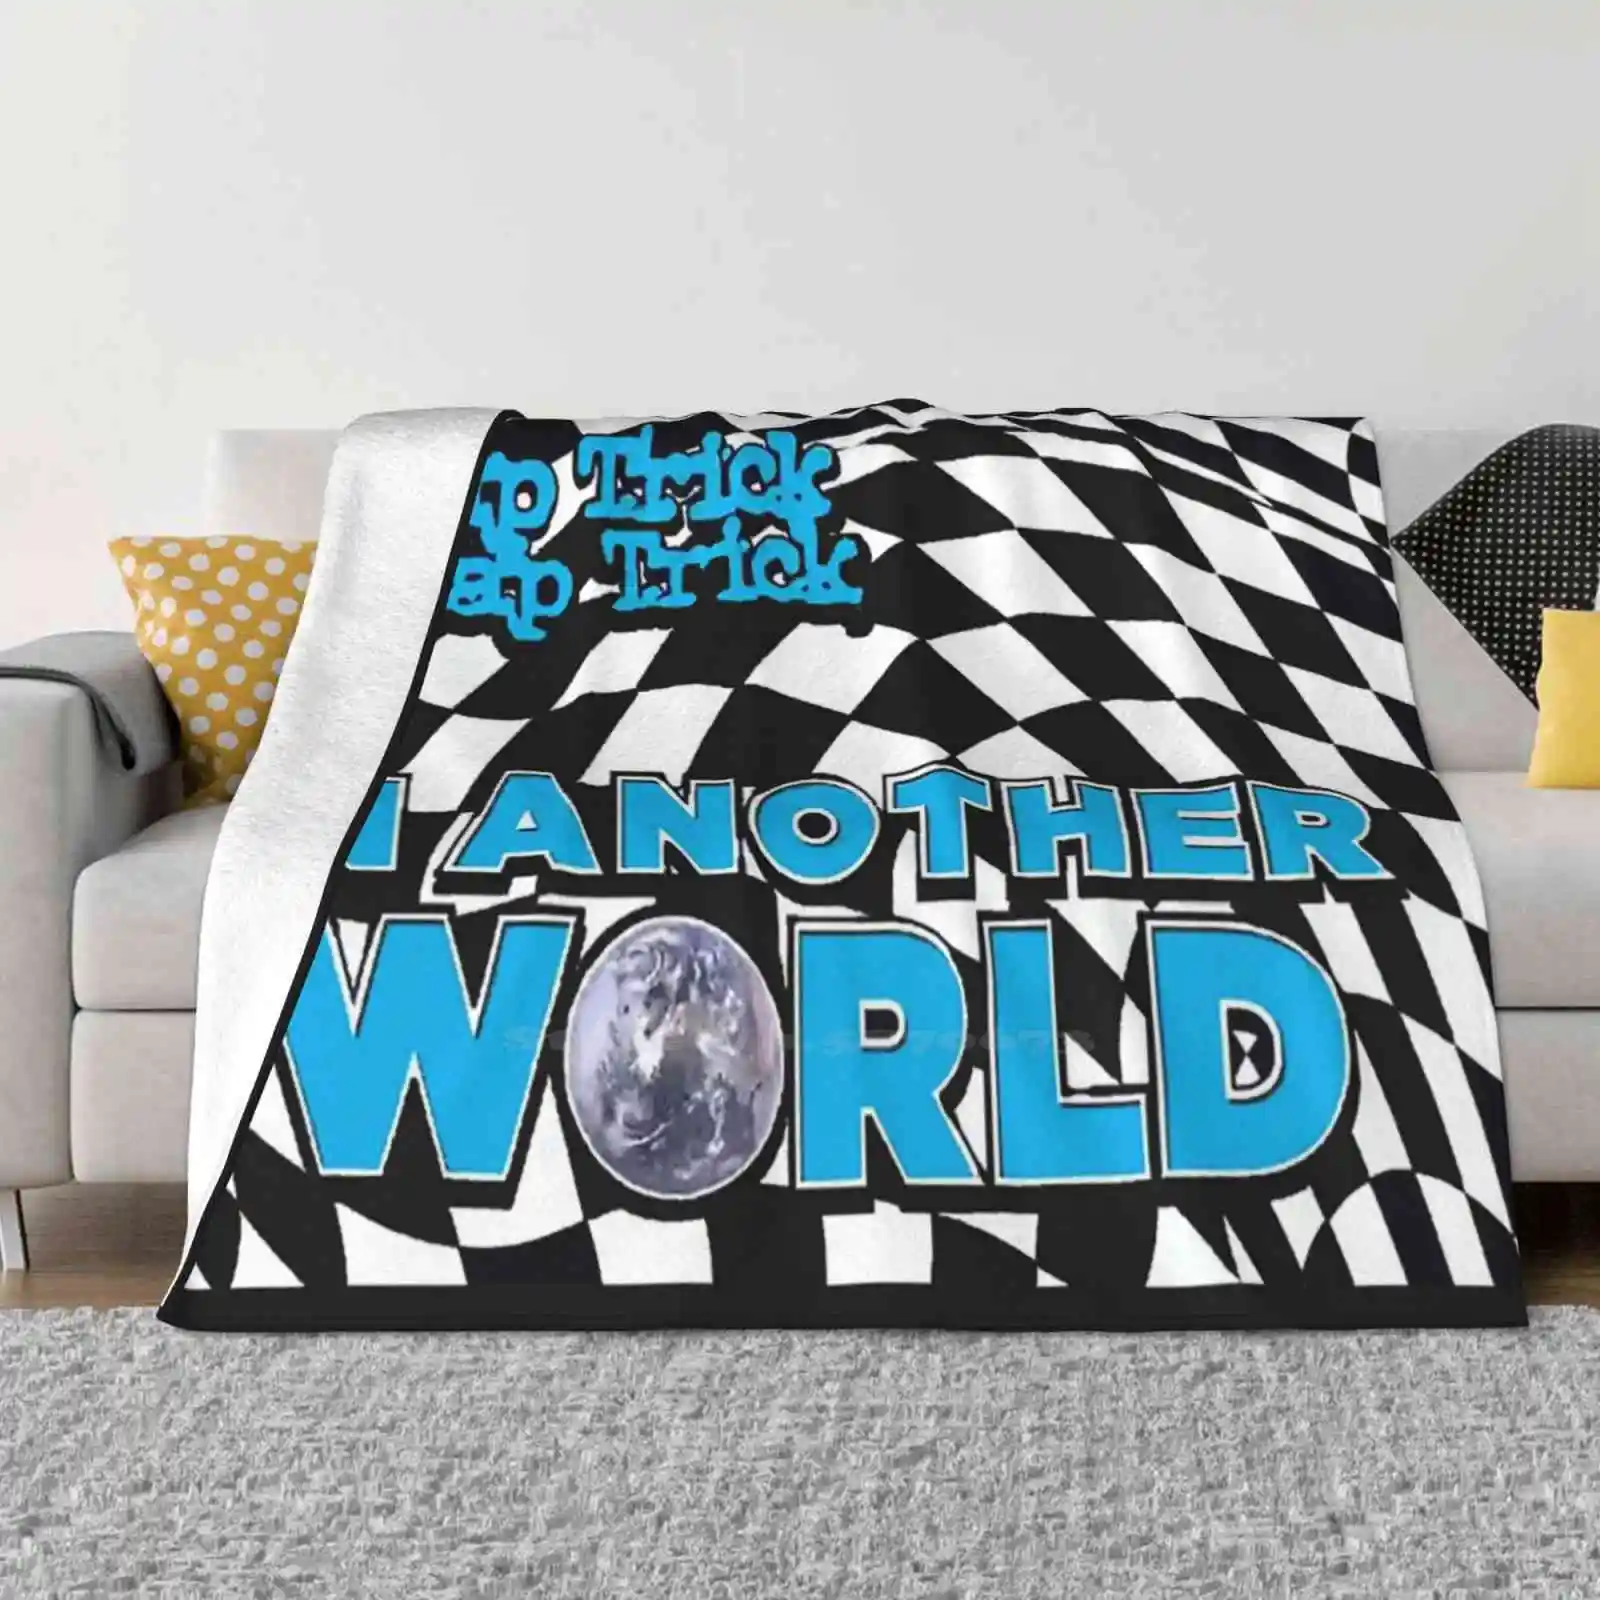 

New Print Novelty Fashion Soft Warm Blanket Live Tour Concert Cover Tickets Songs 2022 World The Greatest Hits The Latest Woke